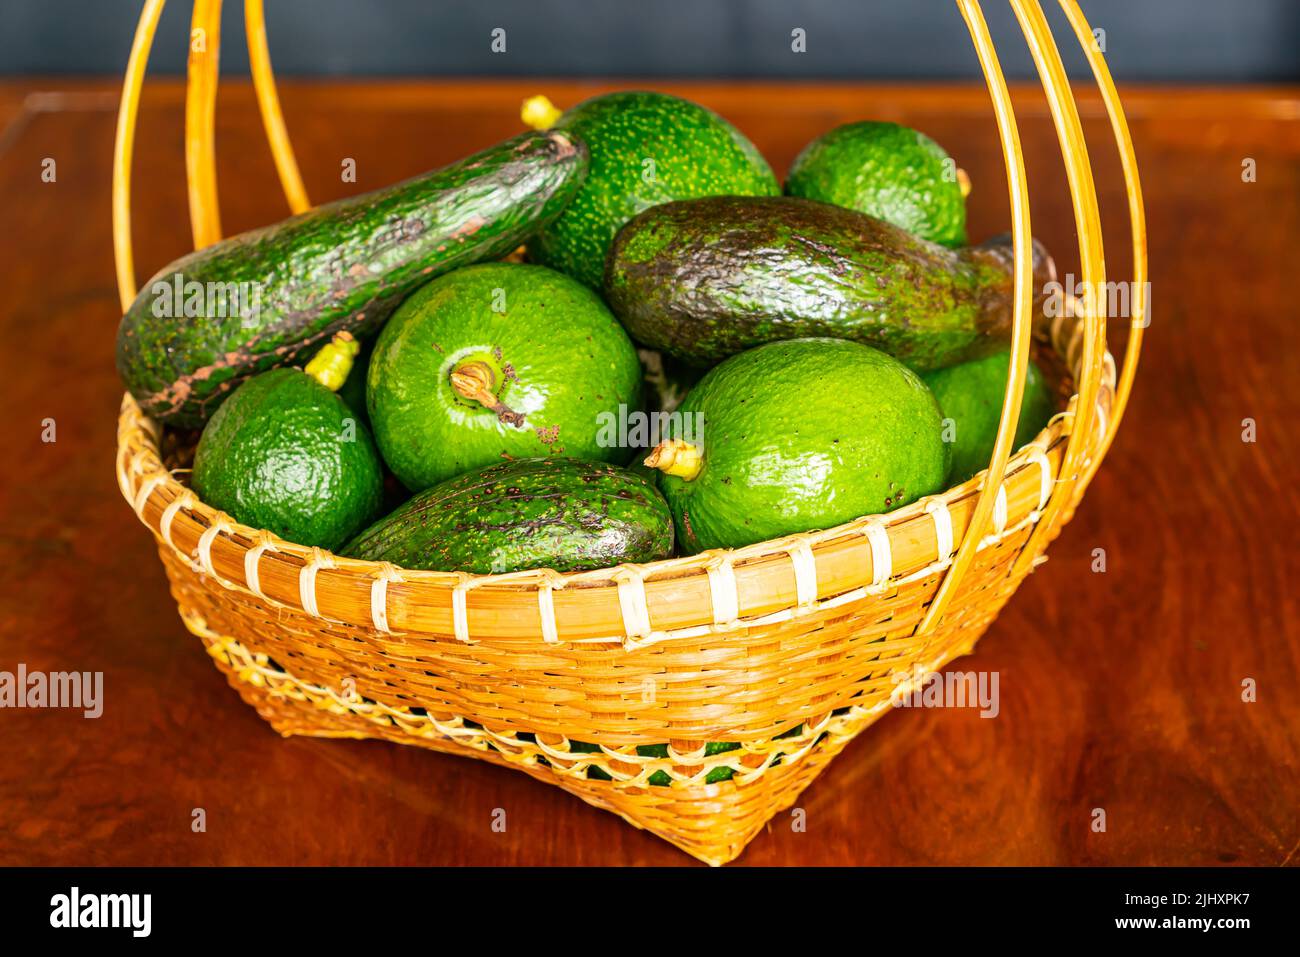 Pile of different varieties of fresh green avocado in wicker bamboo basket on wooden table. Stock Photo